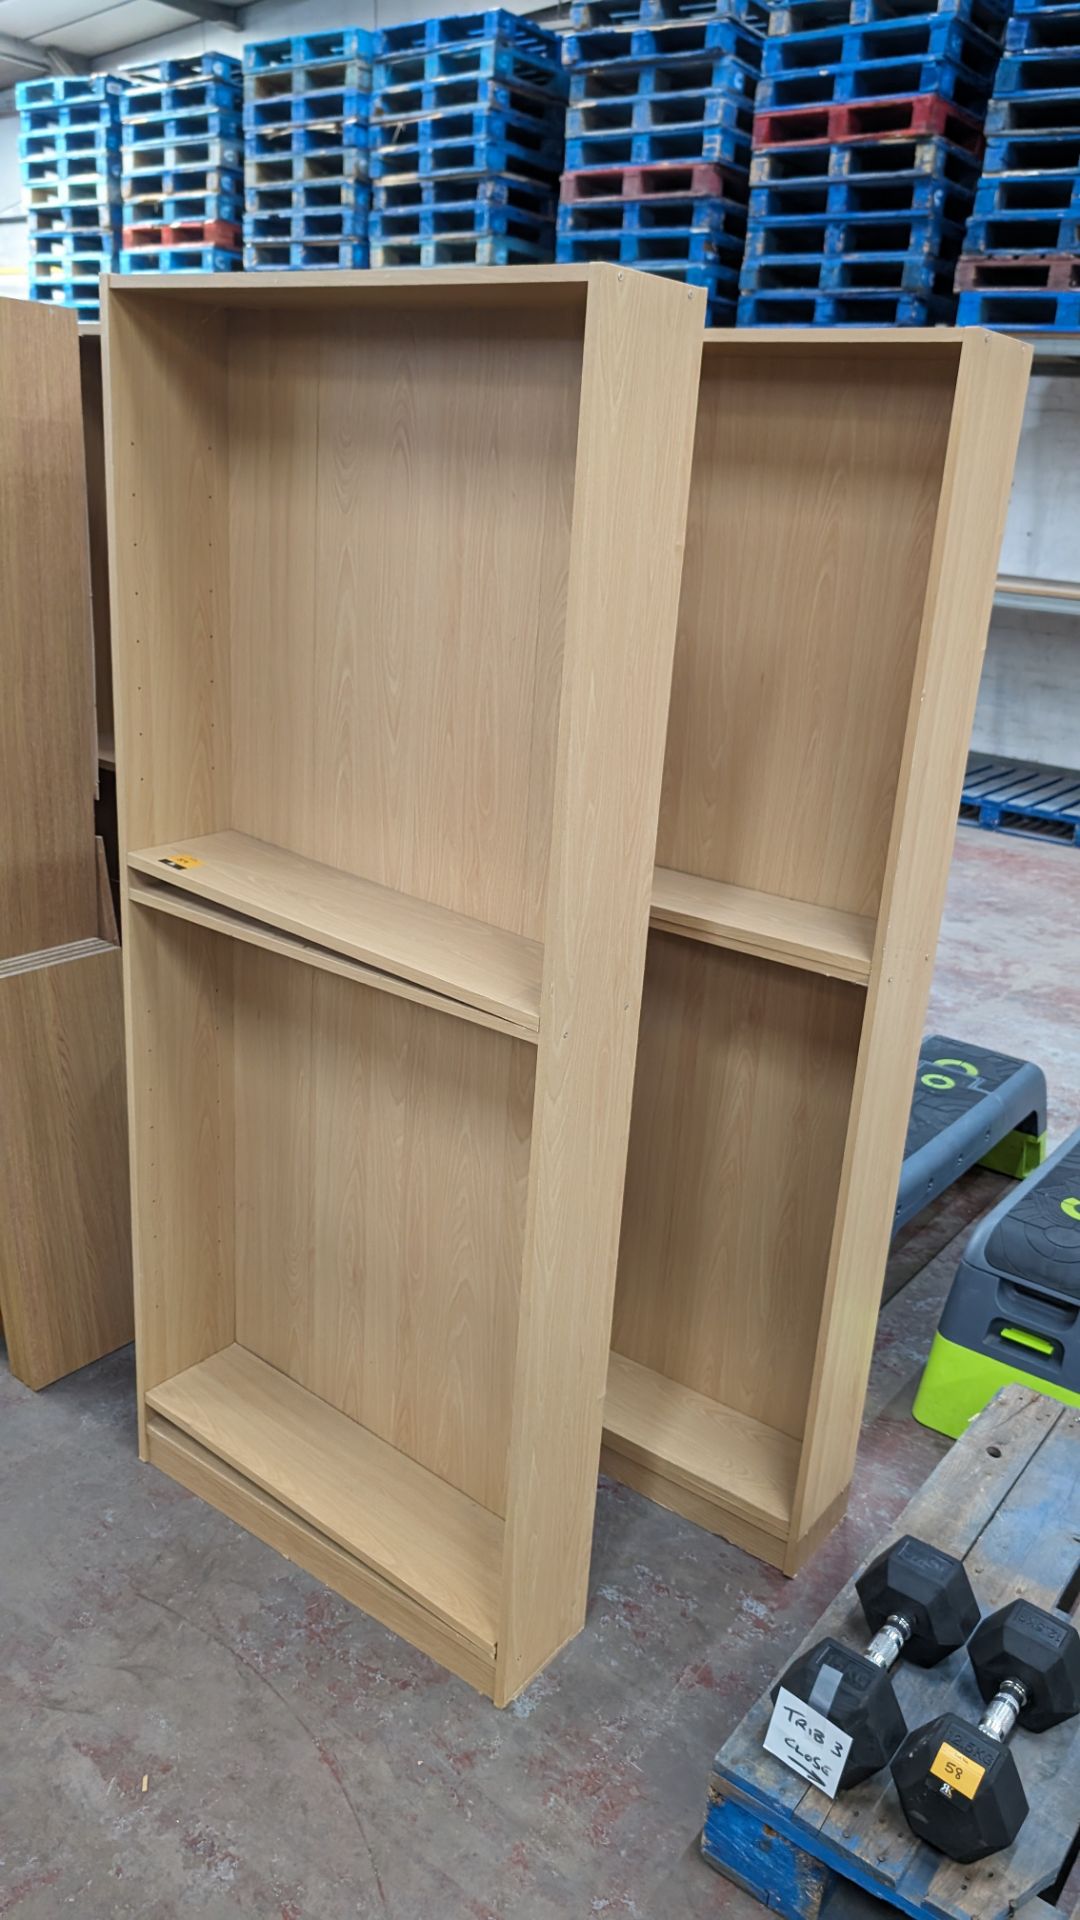 2 off bookcases, each measuring 1800mm x 780mm x 200mm